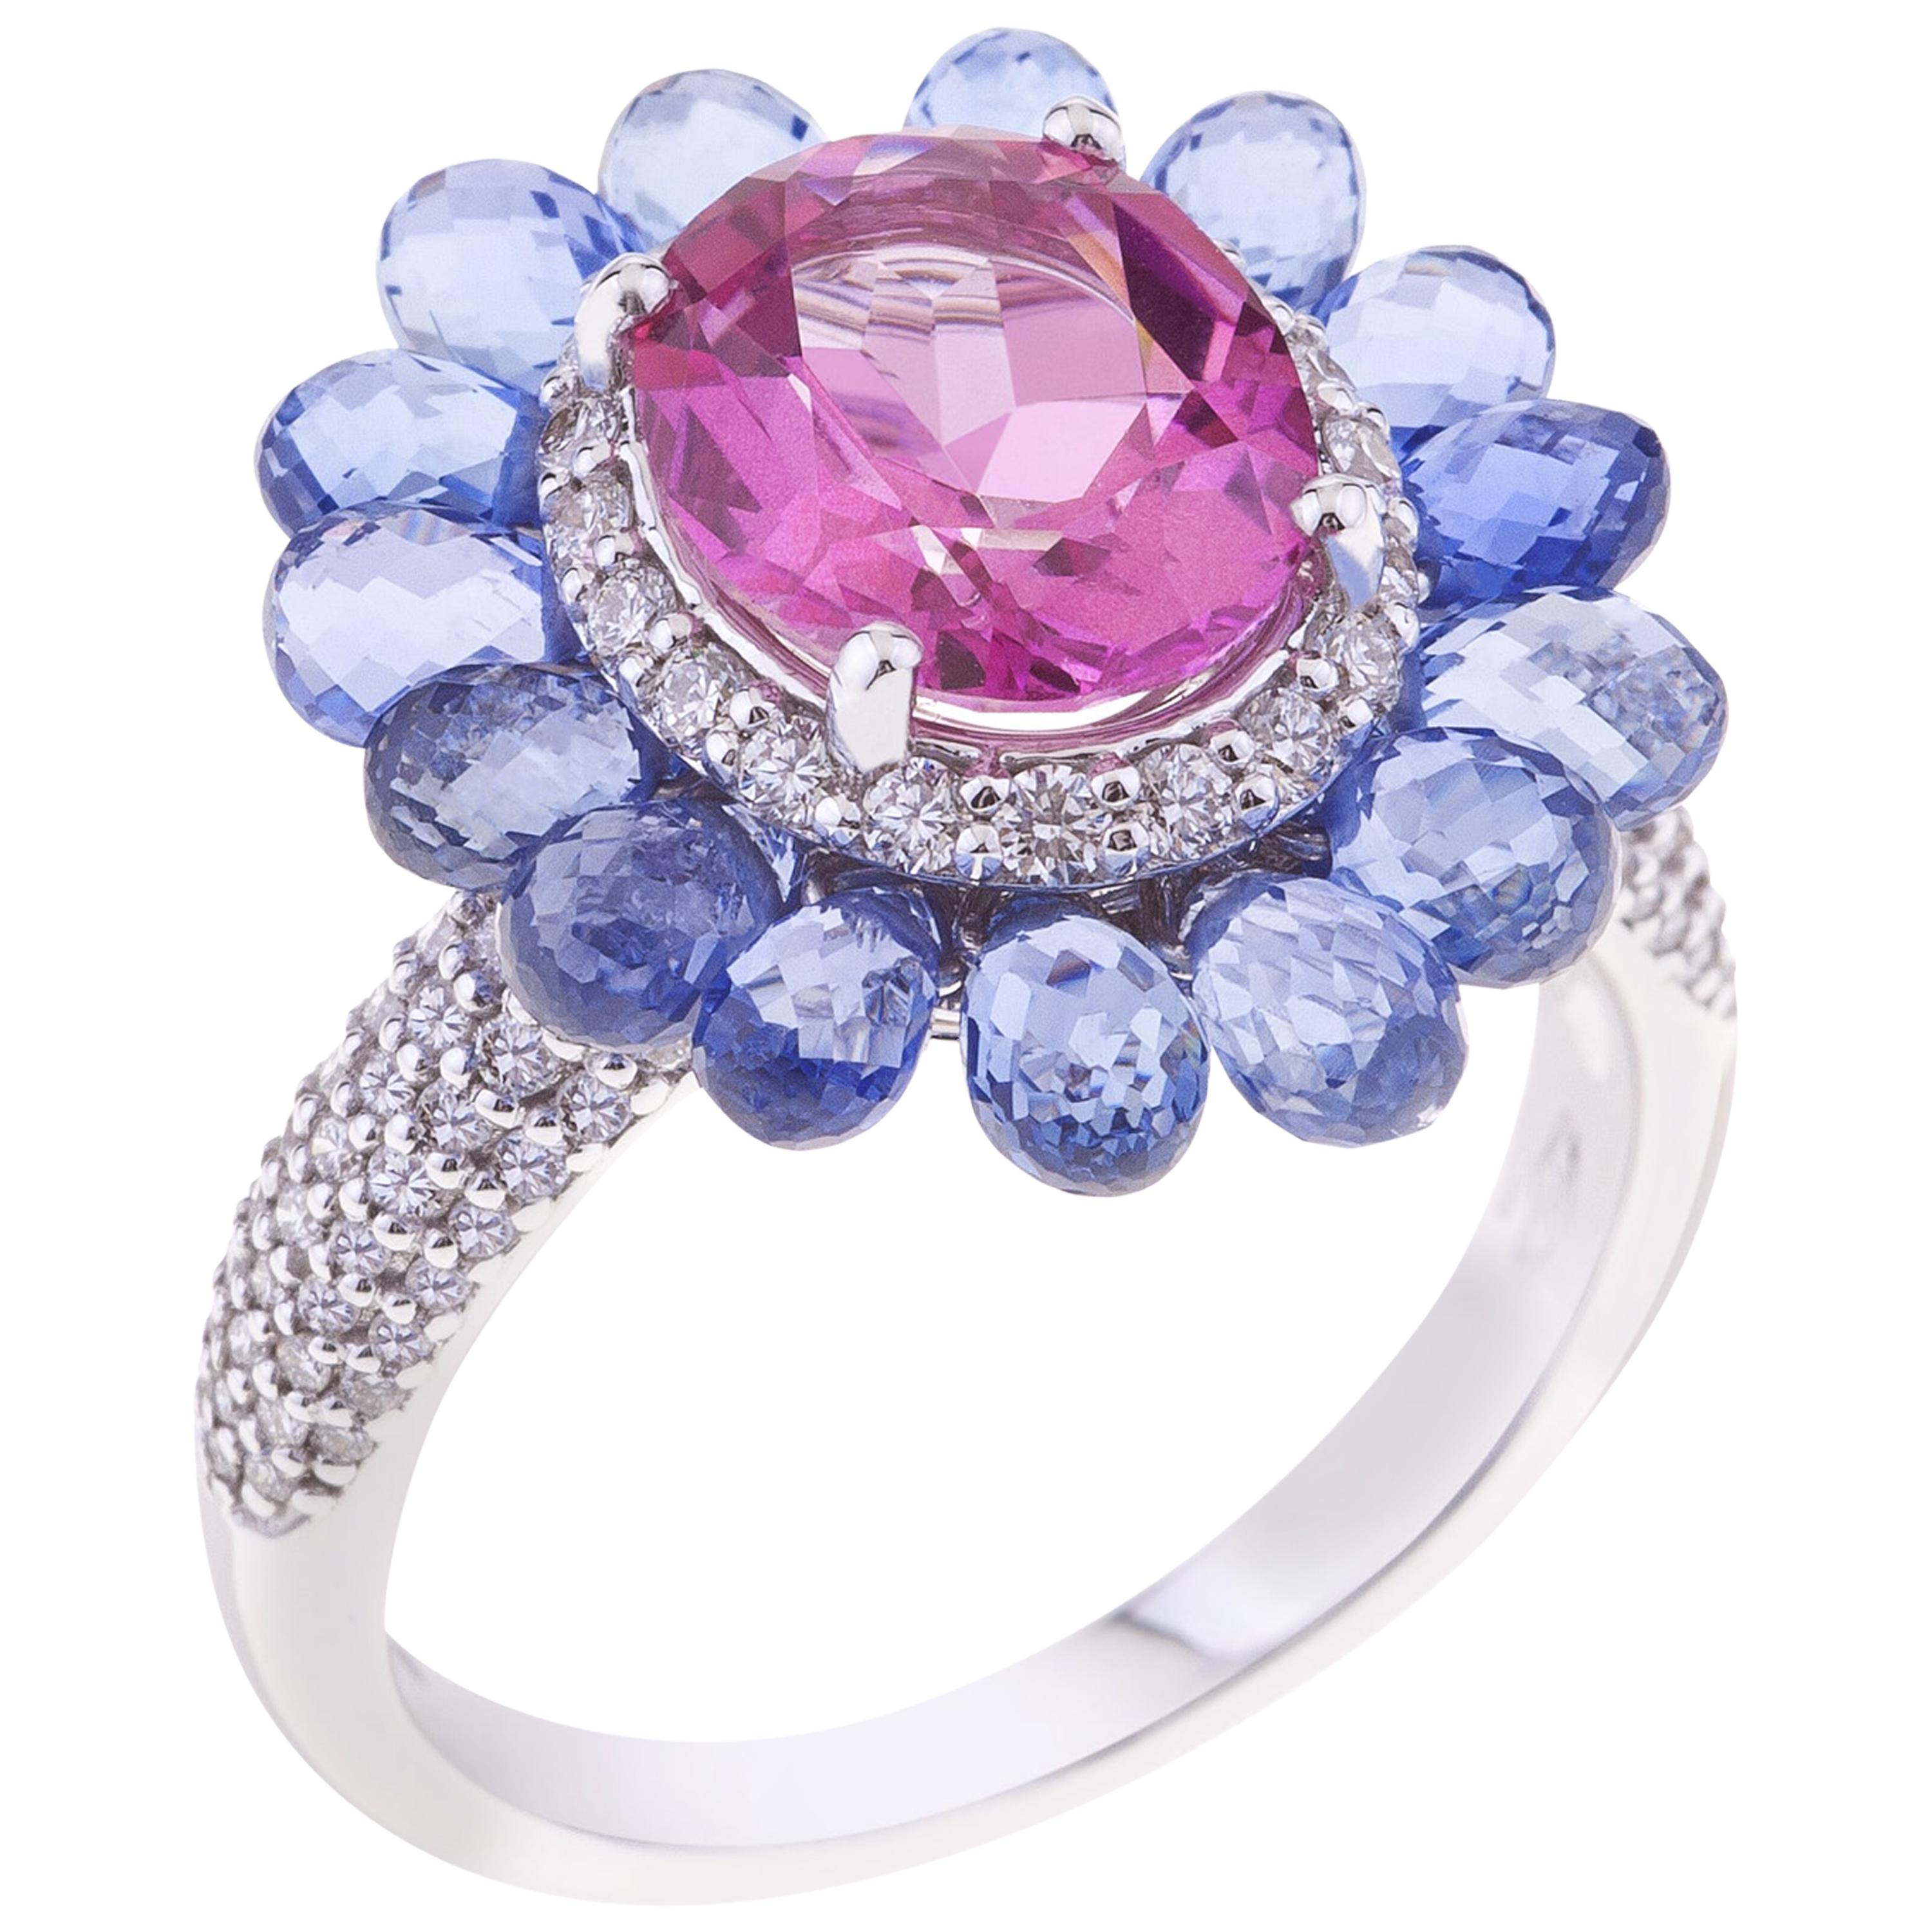 Flower Ring White Gold with Oval Pink Topaz, Blue Sapphires, Diamonds